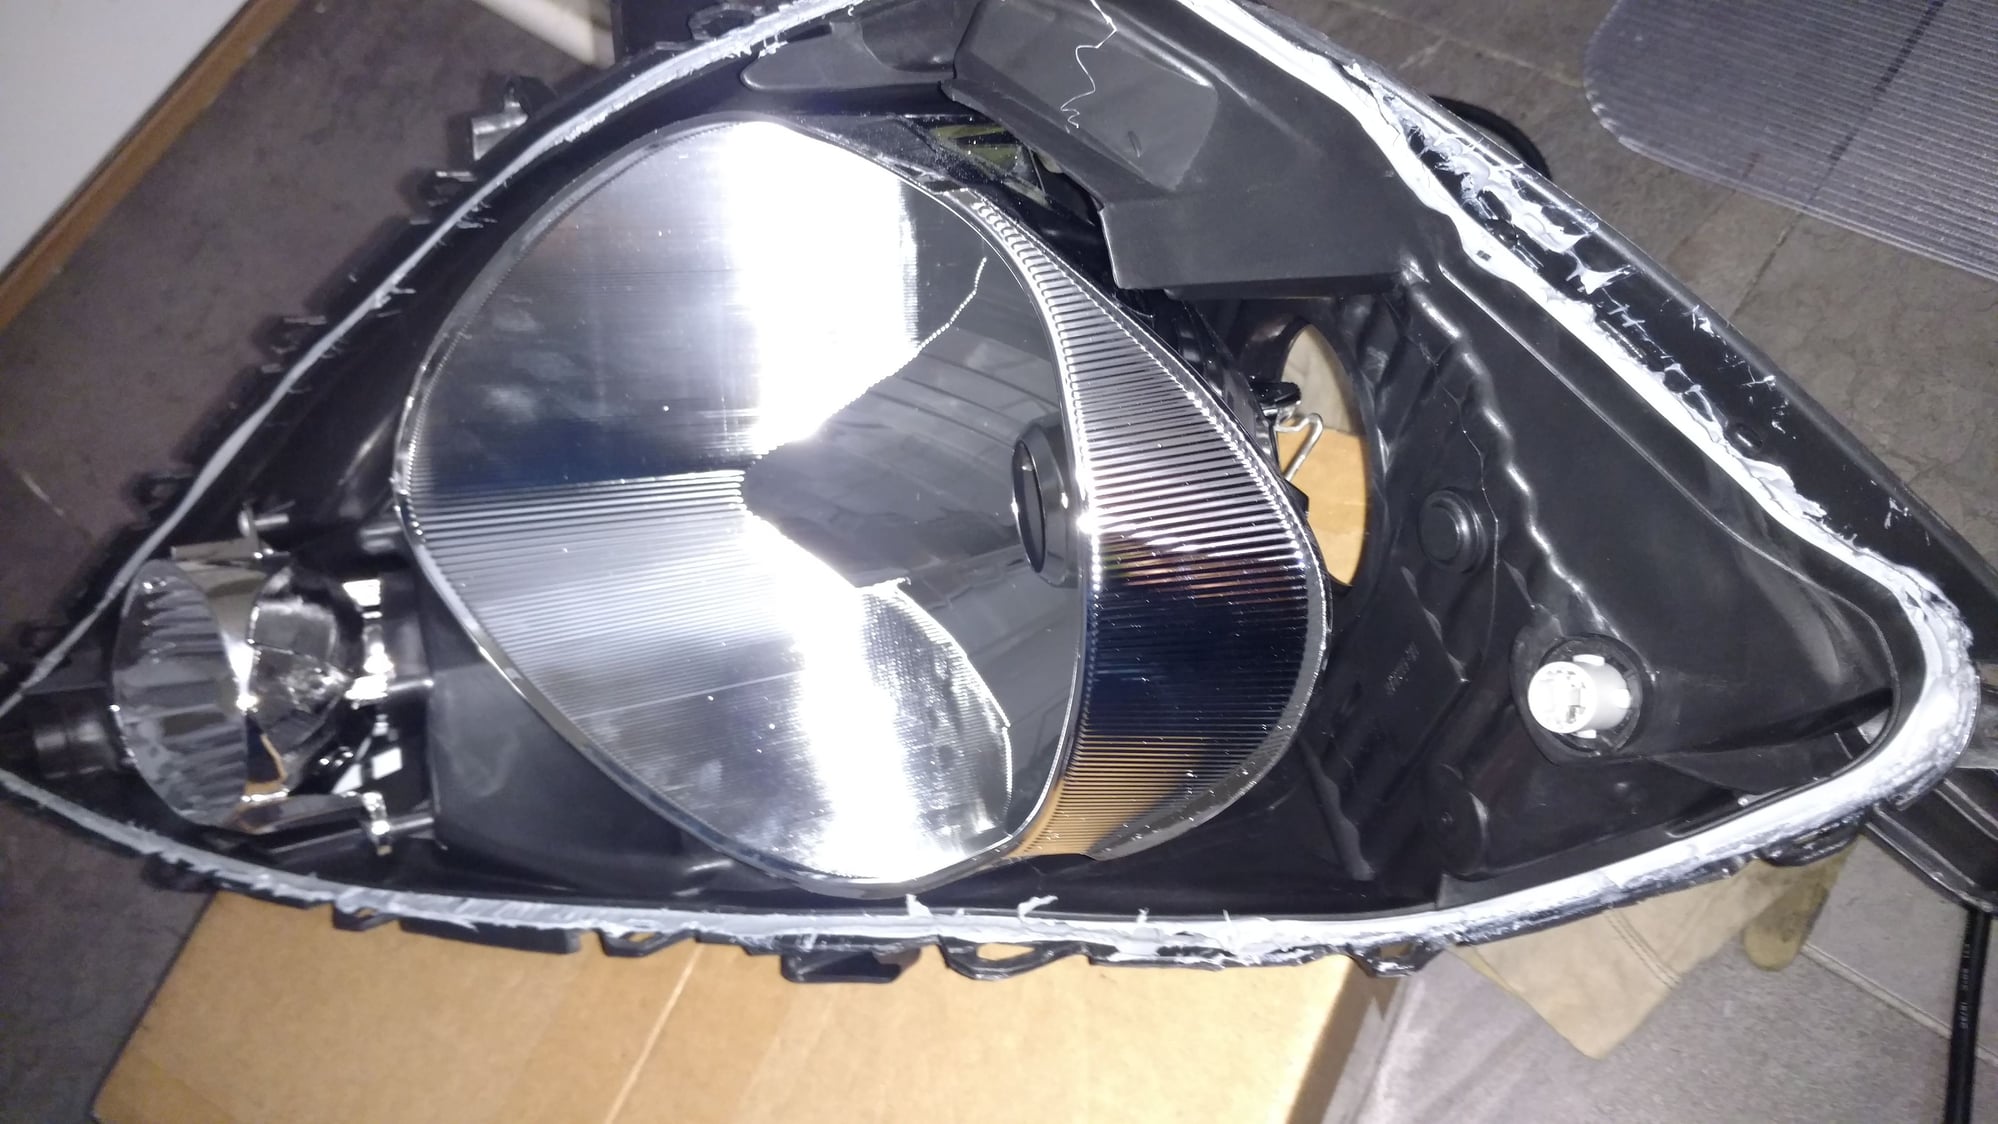 Safe to use this heatgun for reflector removal? - BMW M2 Forum